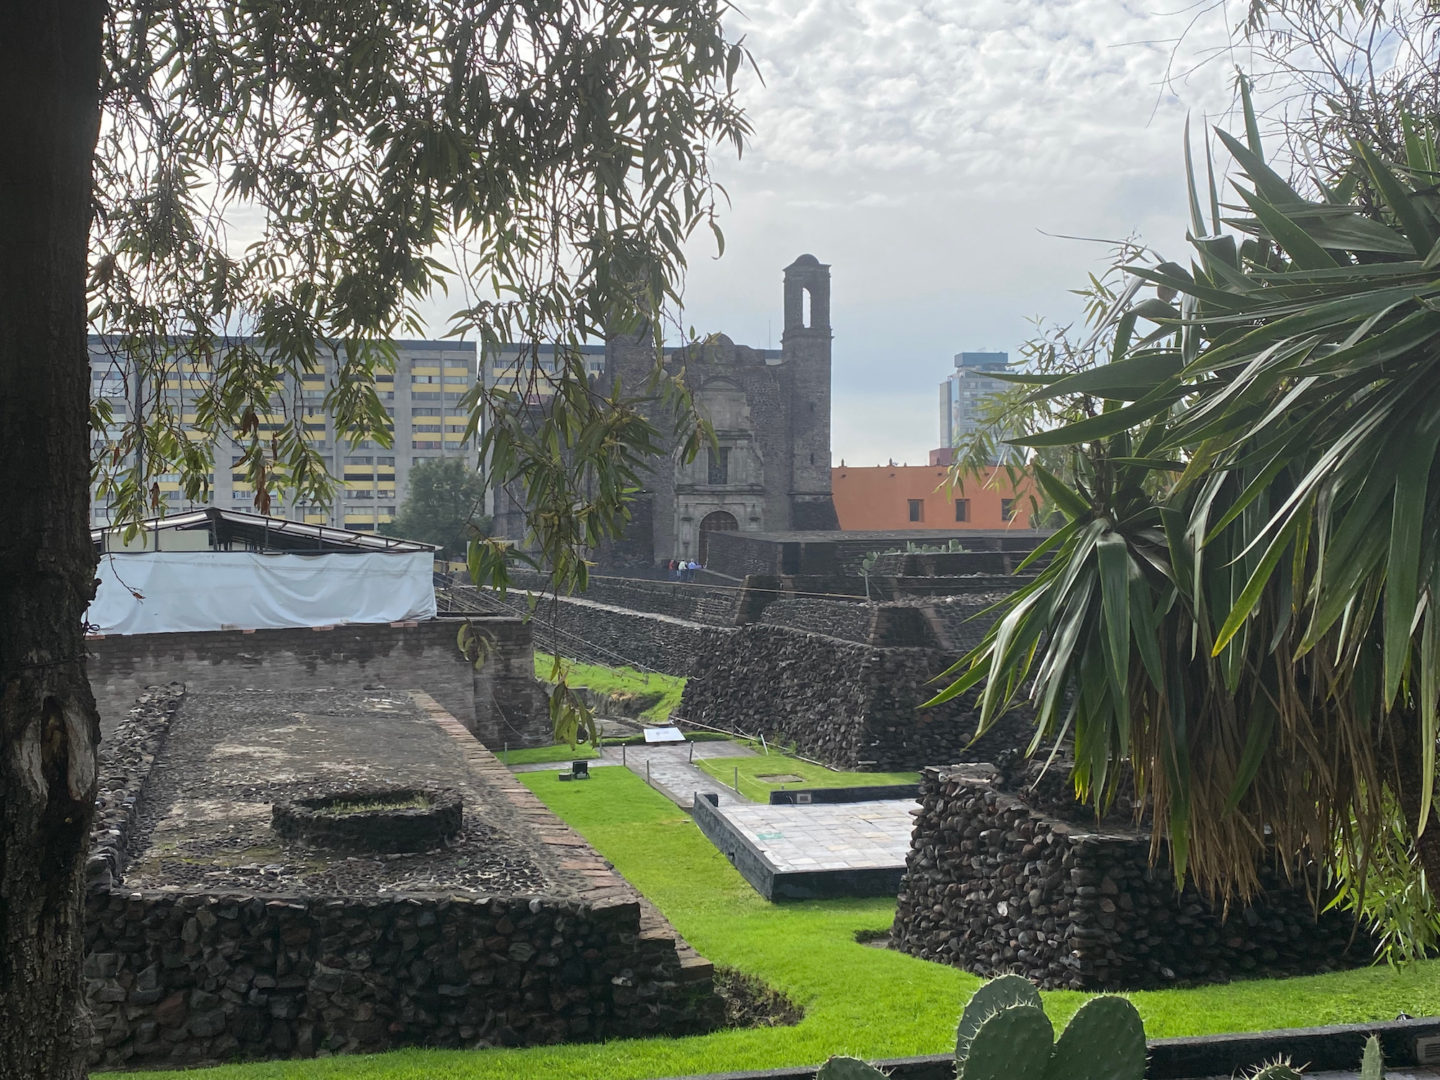 Archeological site of Tlateloco (foreground) and Church of Santiago Tlatelolco (background), Mexico City, Mexico